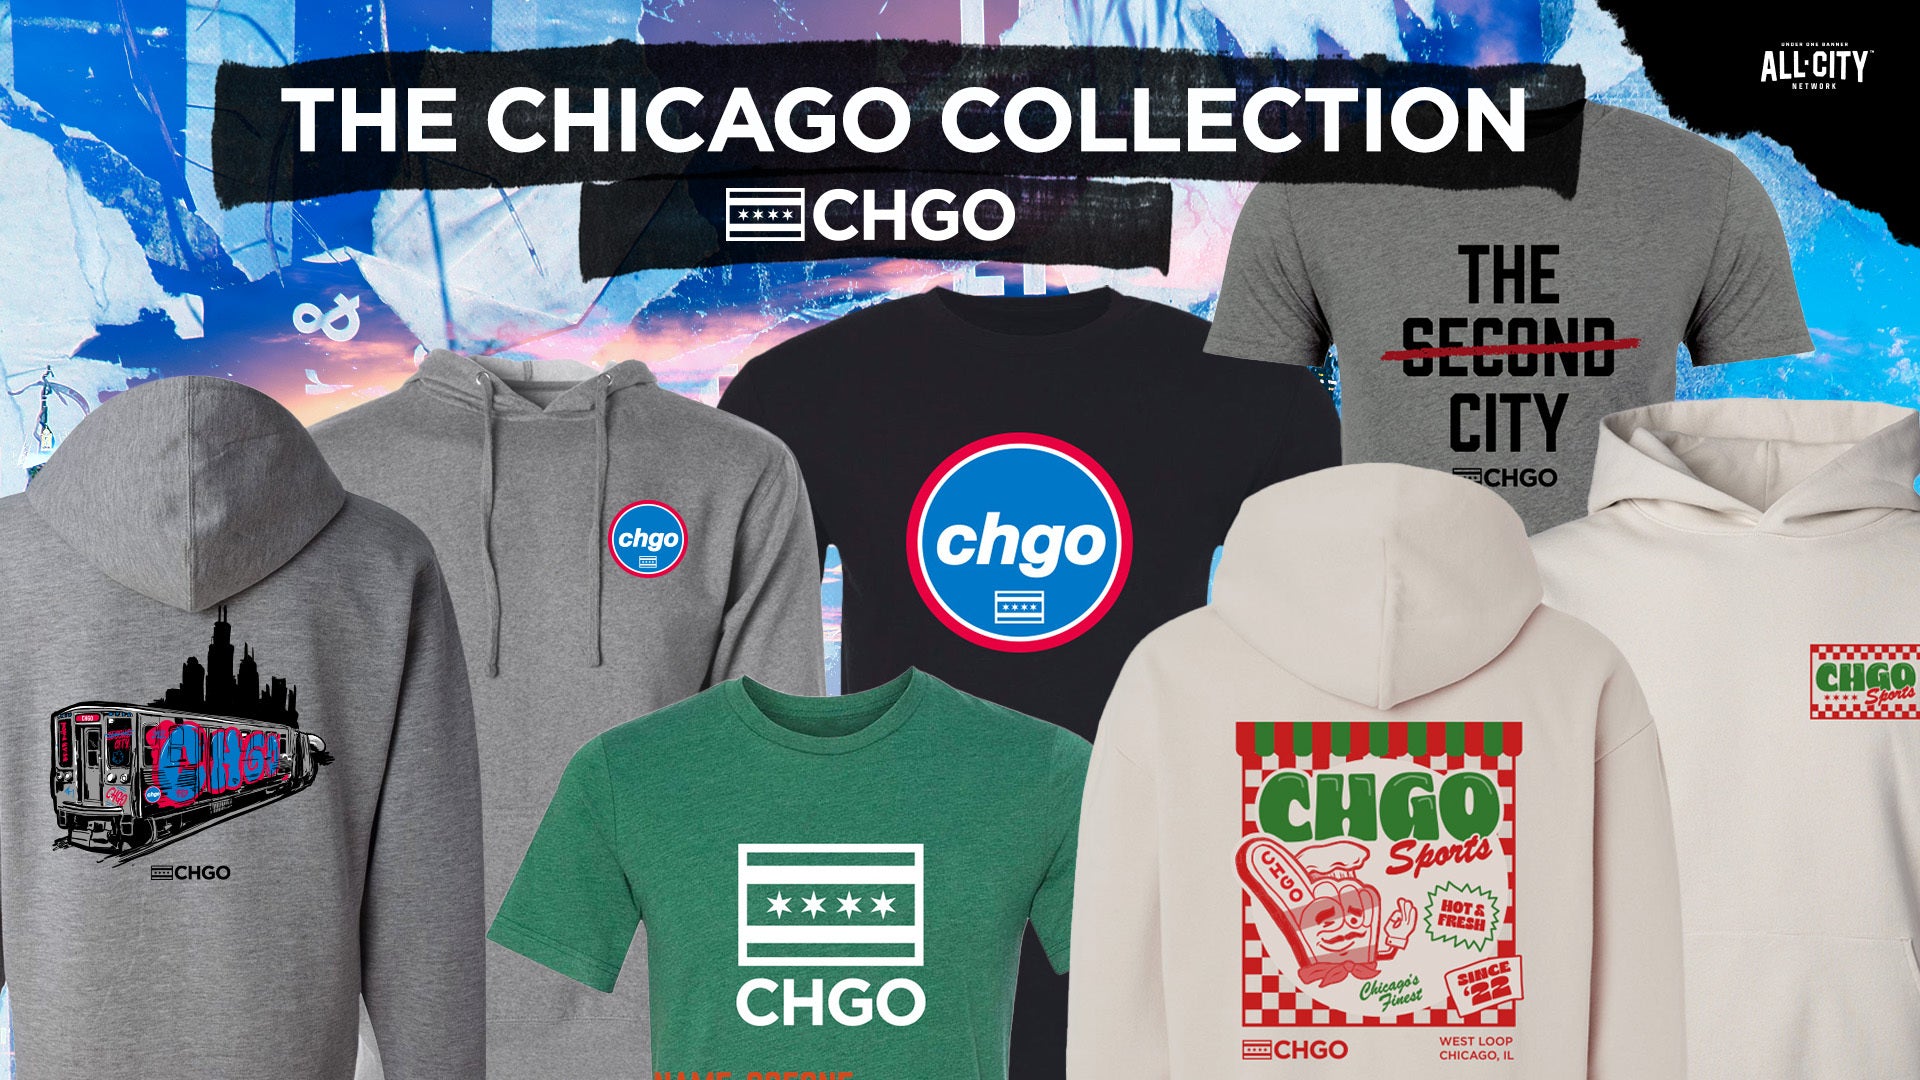 The Chicago Collection